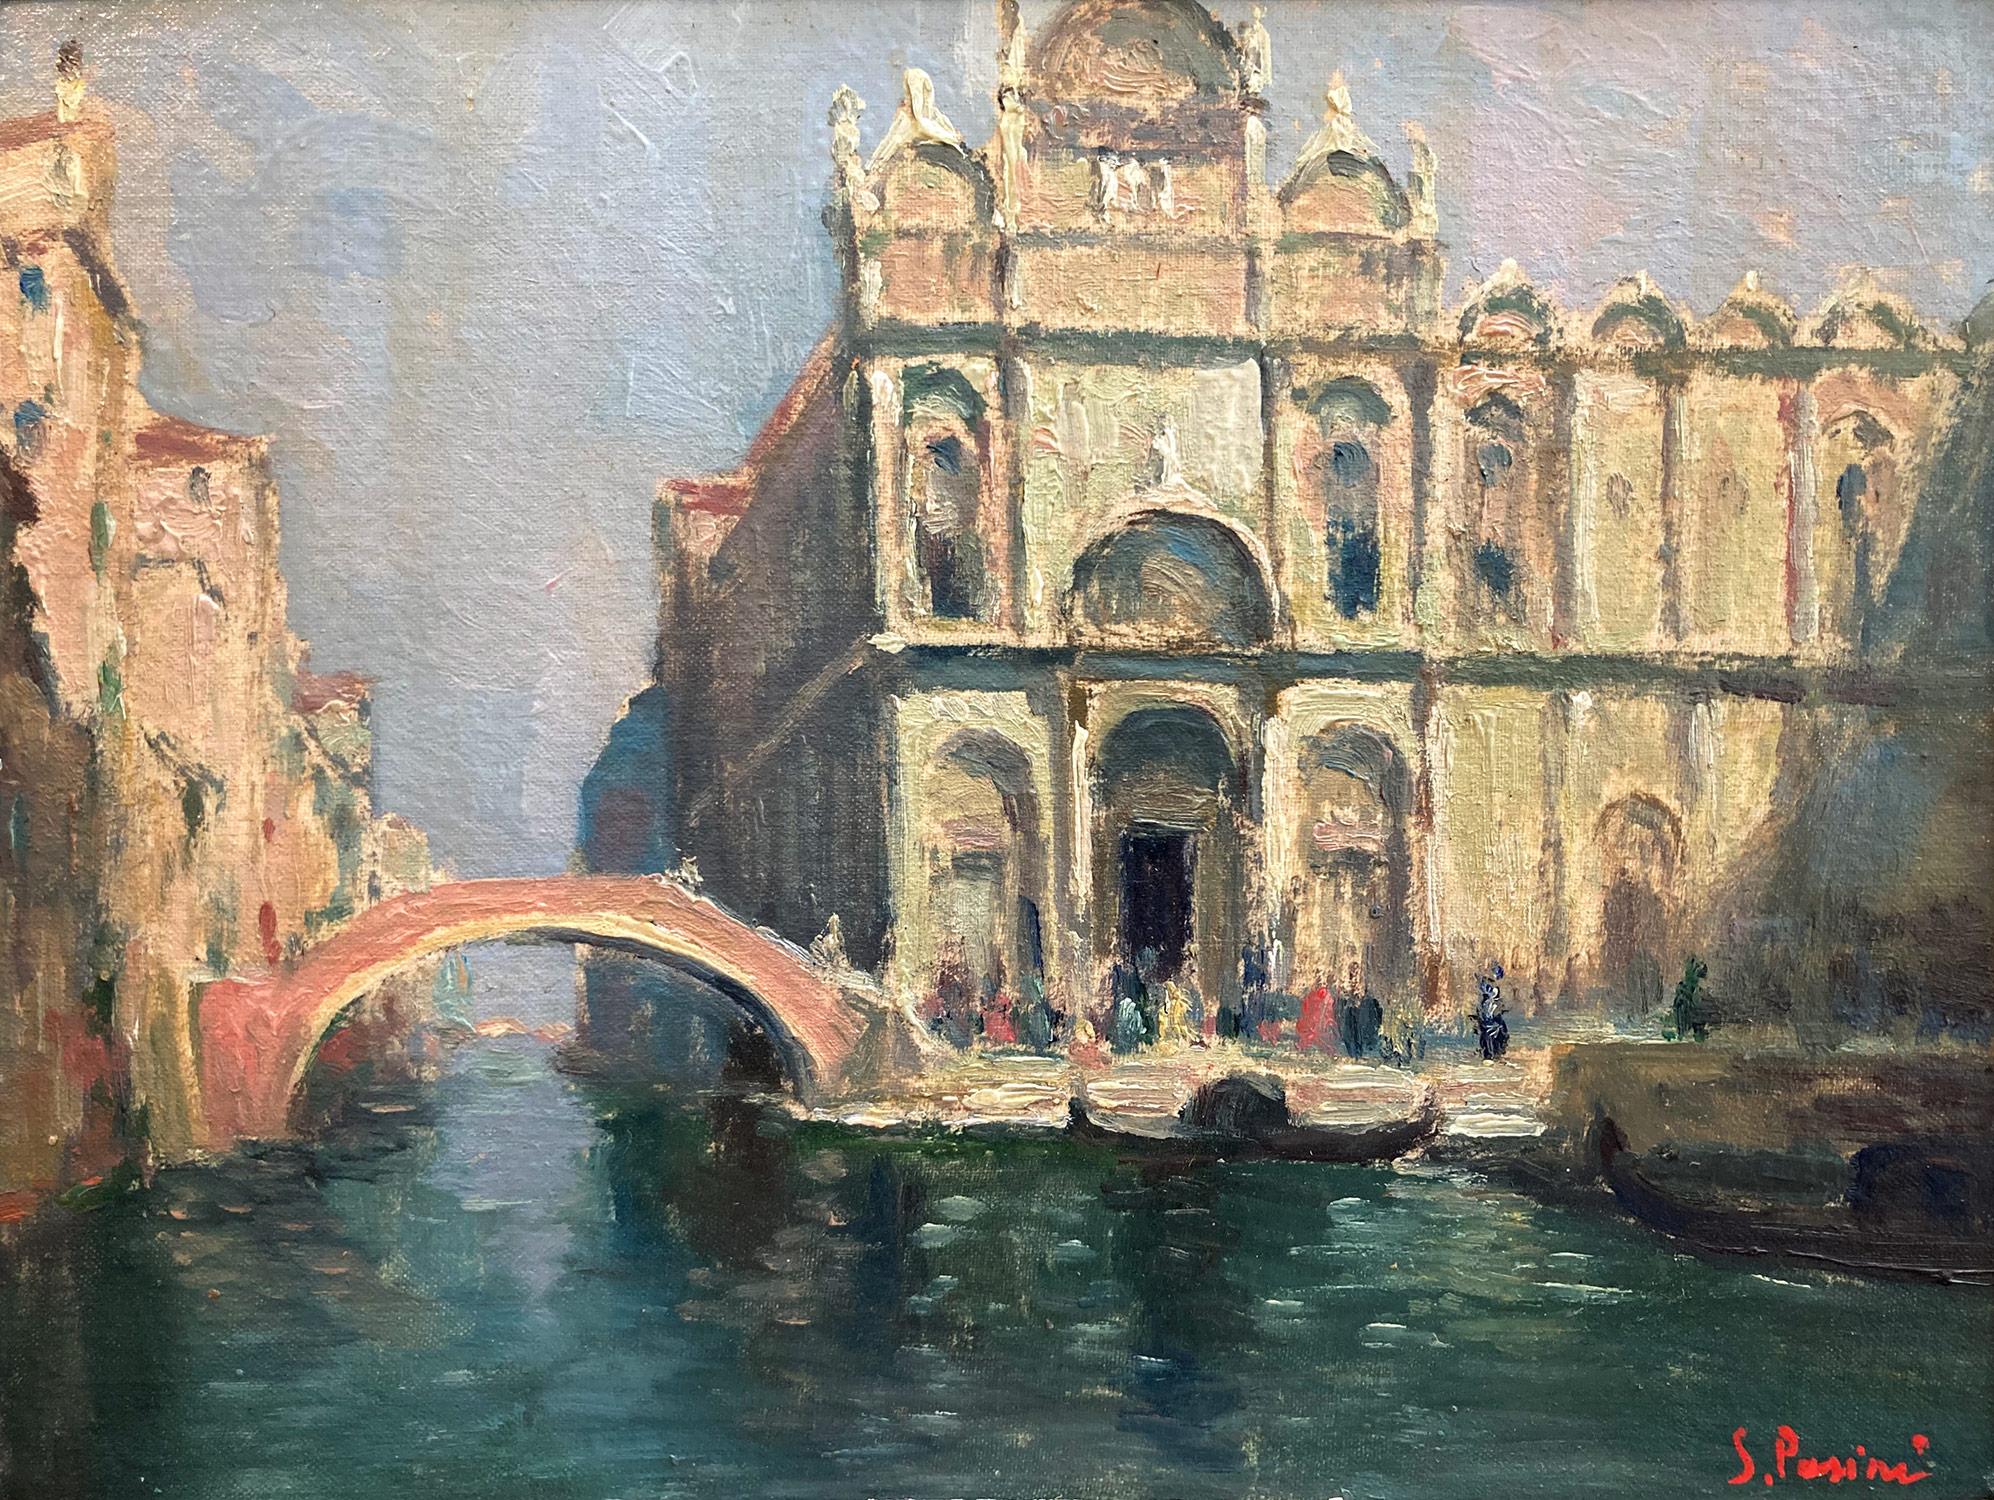 A stunning oil painting scene depicting figures by the Canale veneziano e l'ospedale di San Giovanni e Paolo executed in the 20th Century. The vibrant colors and impressionistic brushwork is done with both detail and precision. The people are